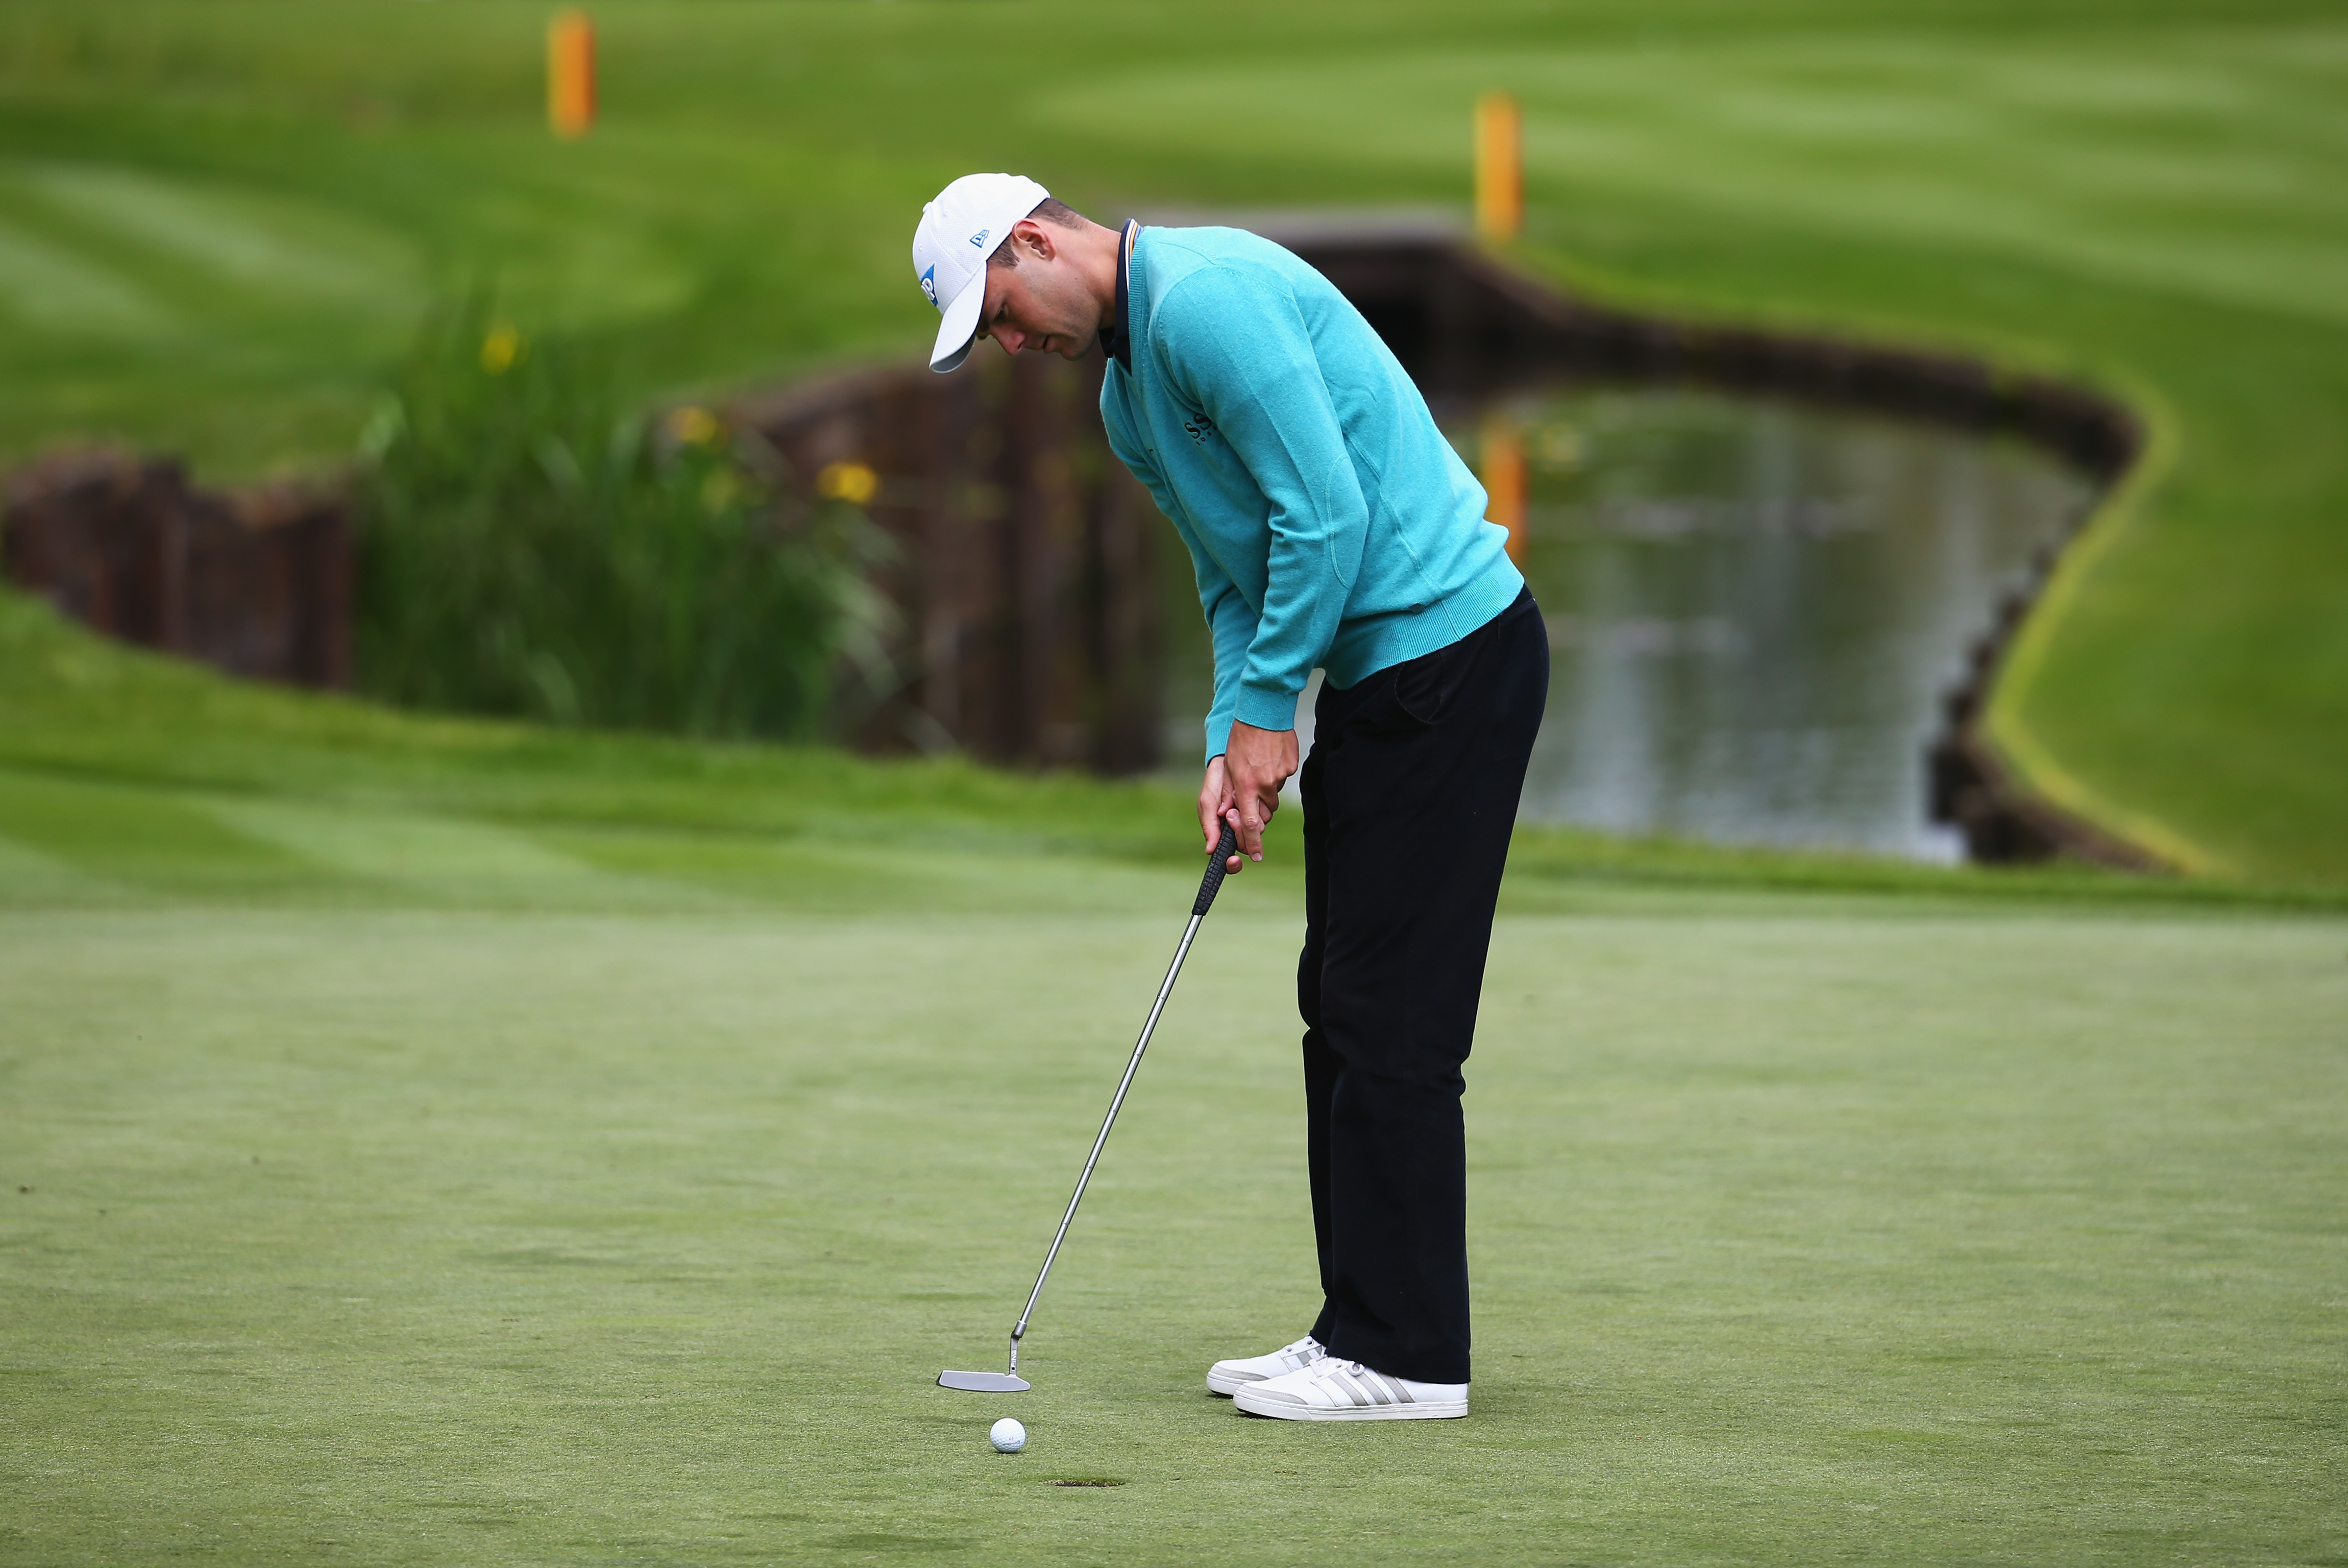 Germany's Martin Kaymer suggested moving the PGA back in the calendar (Photo: Getty Images)